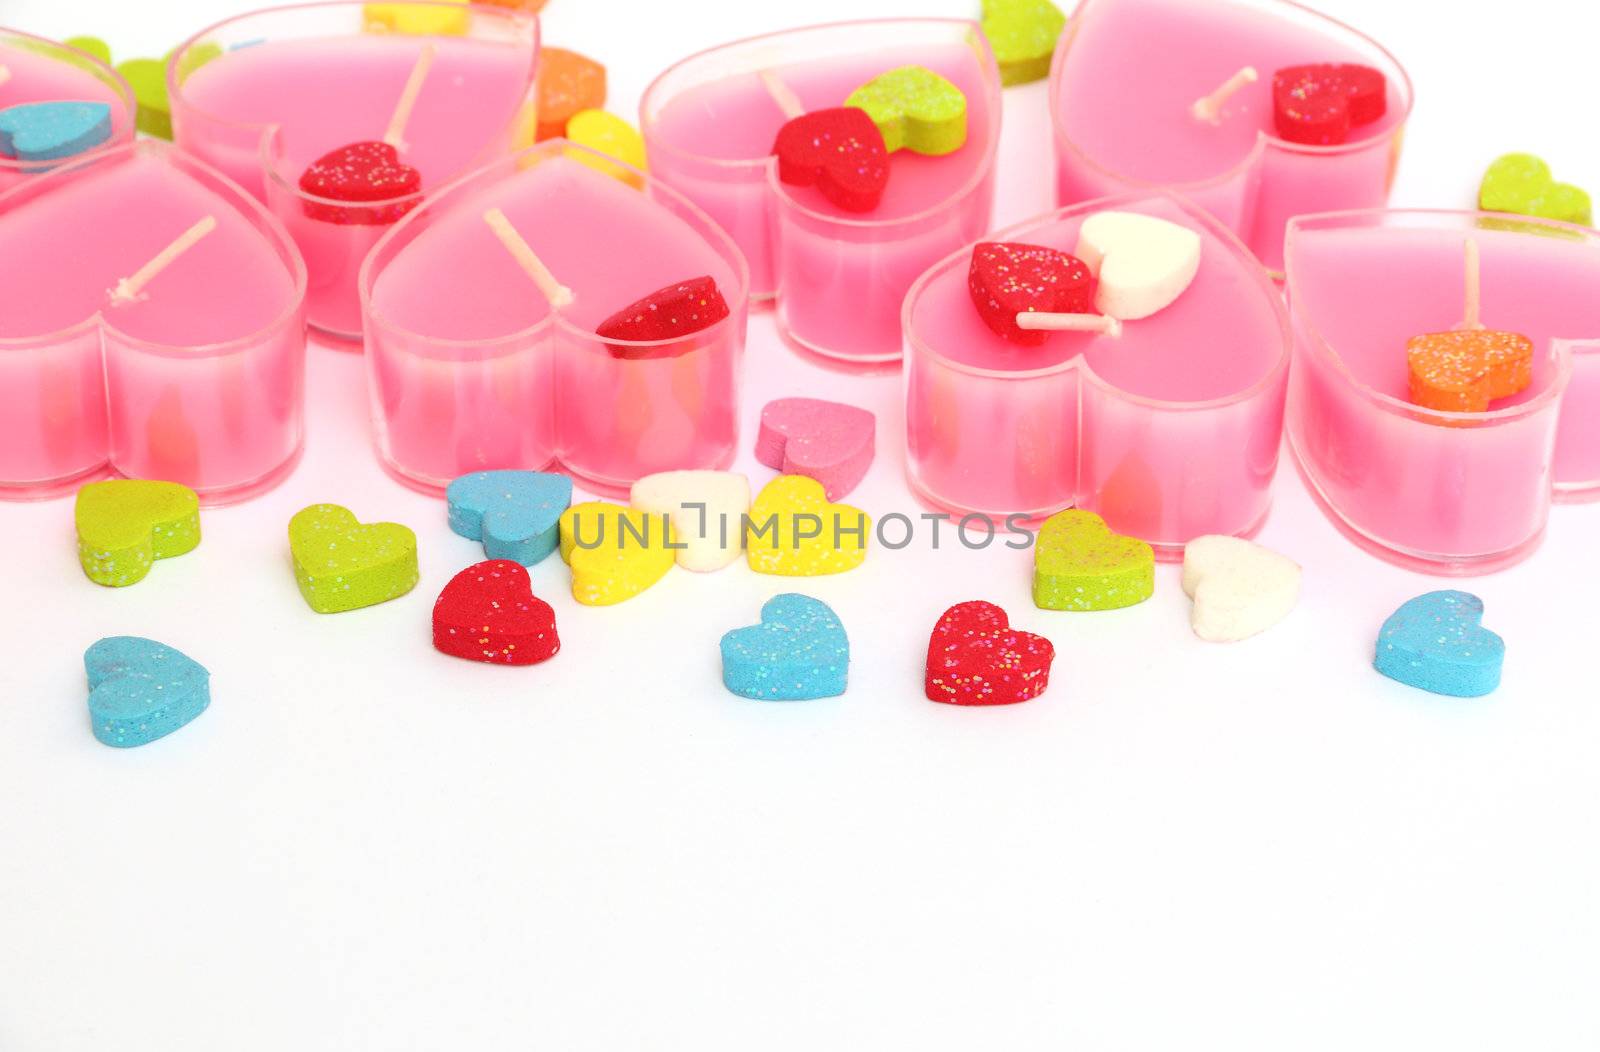 Valentine pink candles in form of heart with some small decorated hearts